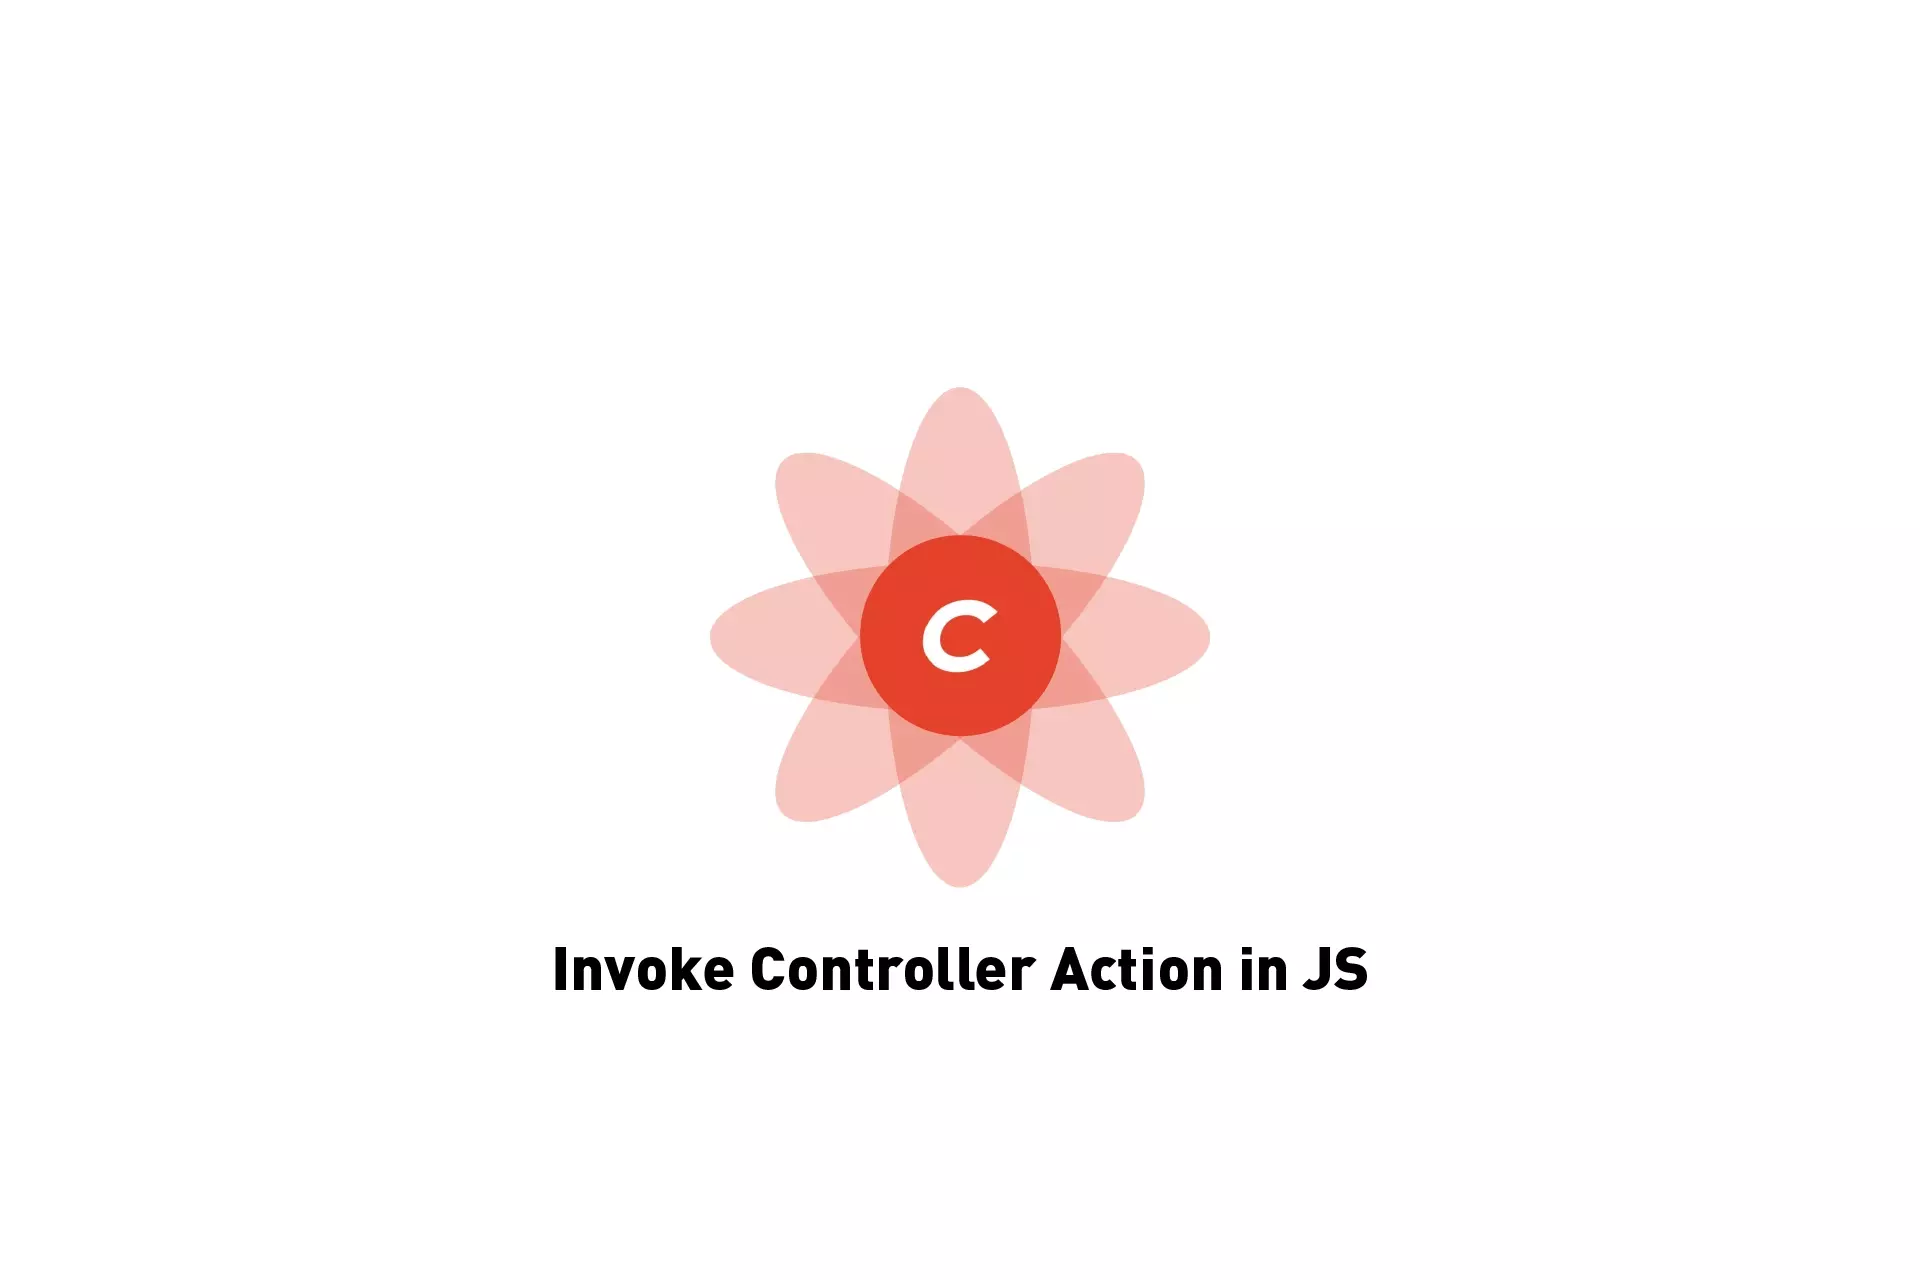 A flower that represents Craft CMS, beneath it sits the text "Invoke Controller Action in JS."